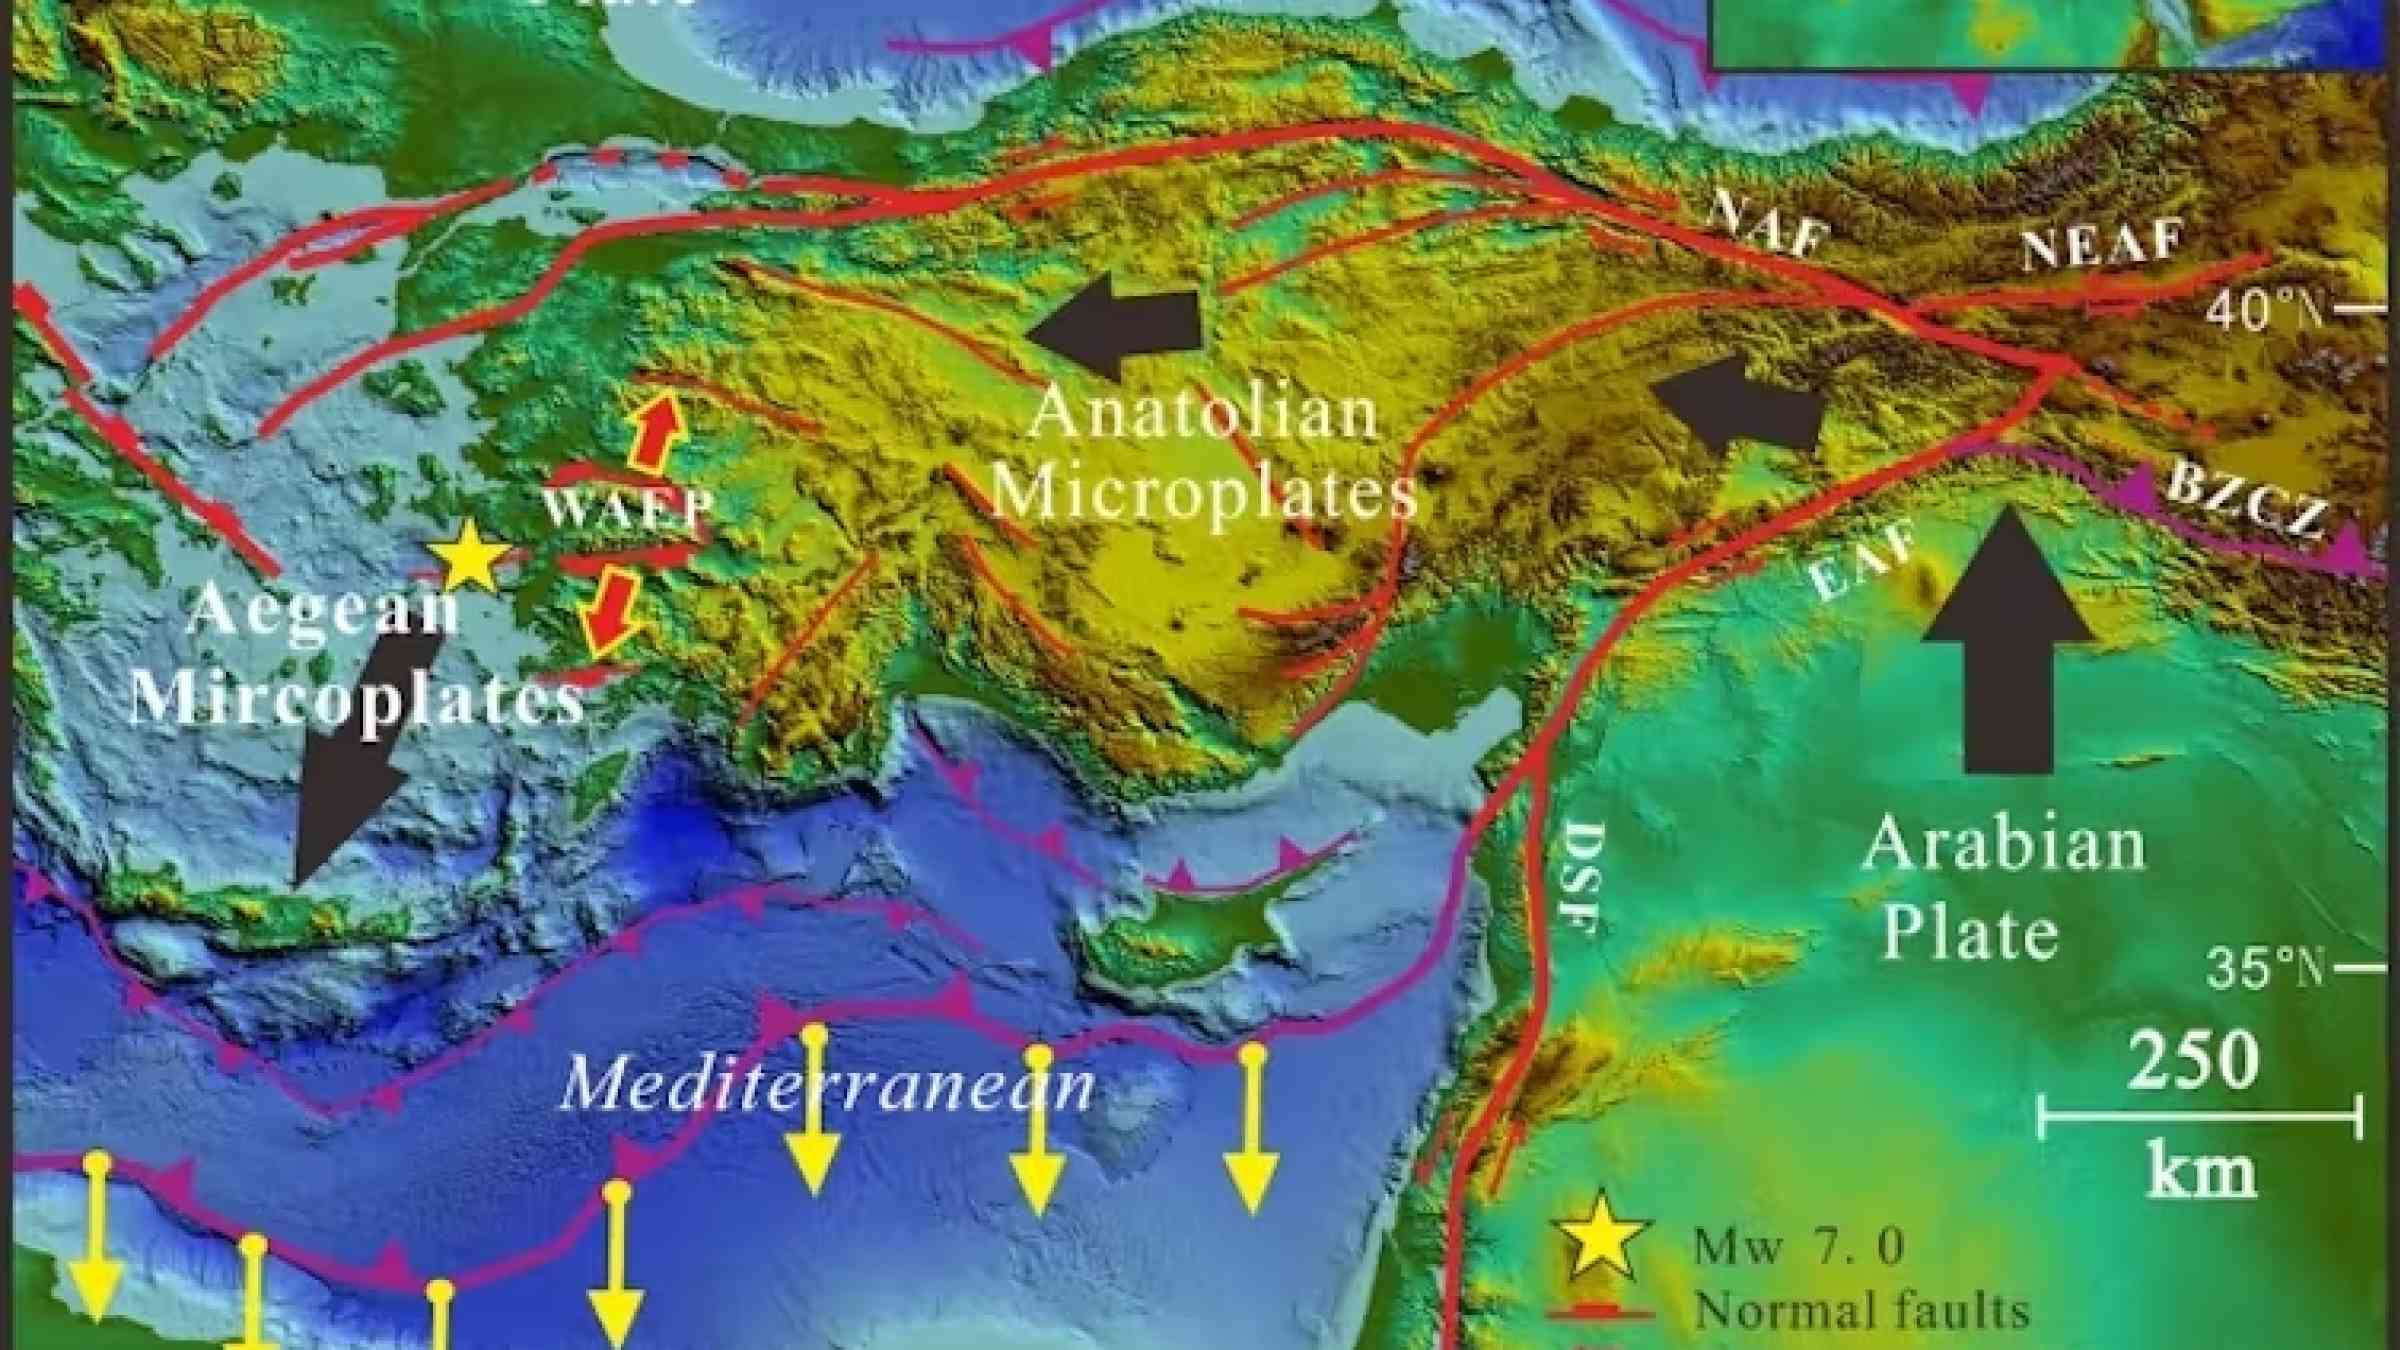 The movement of three competing tectonic plates causes frequent seismic activity in this region. Meng, J., Sinoplu, O., Zhou, Z. et al. Greece and Turkey Shaken by African tectonic retreat. Sci Rep 11, 6486 (2021). https://doi.org/10.1038/s41598-021-86063-y, CC BY-NC